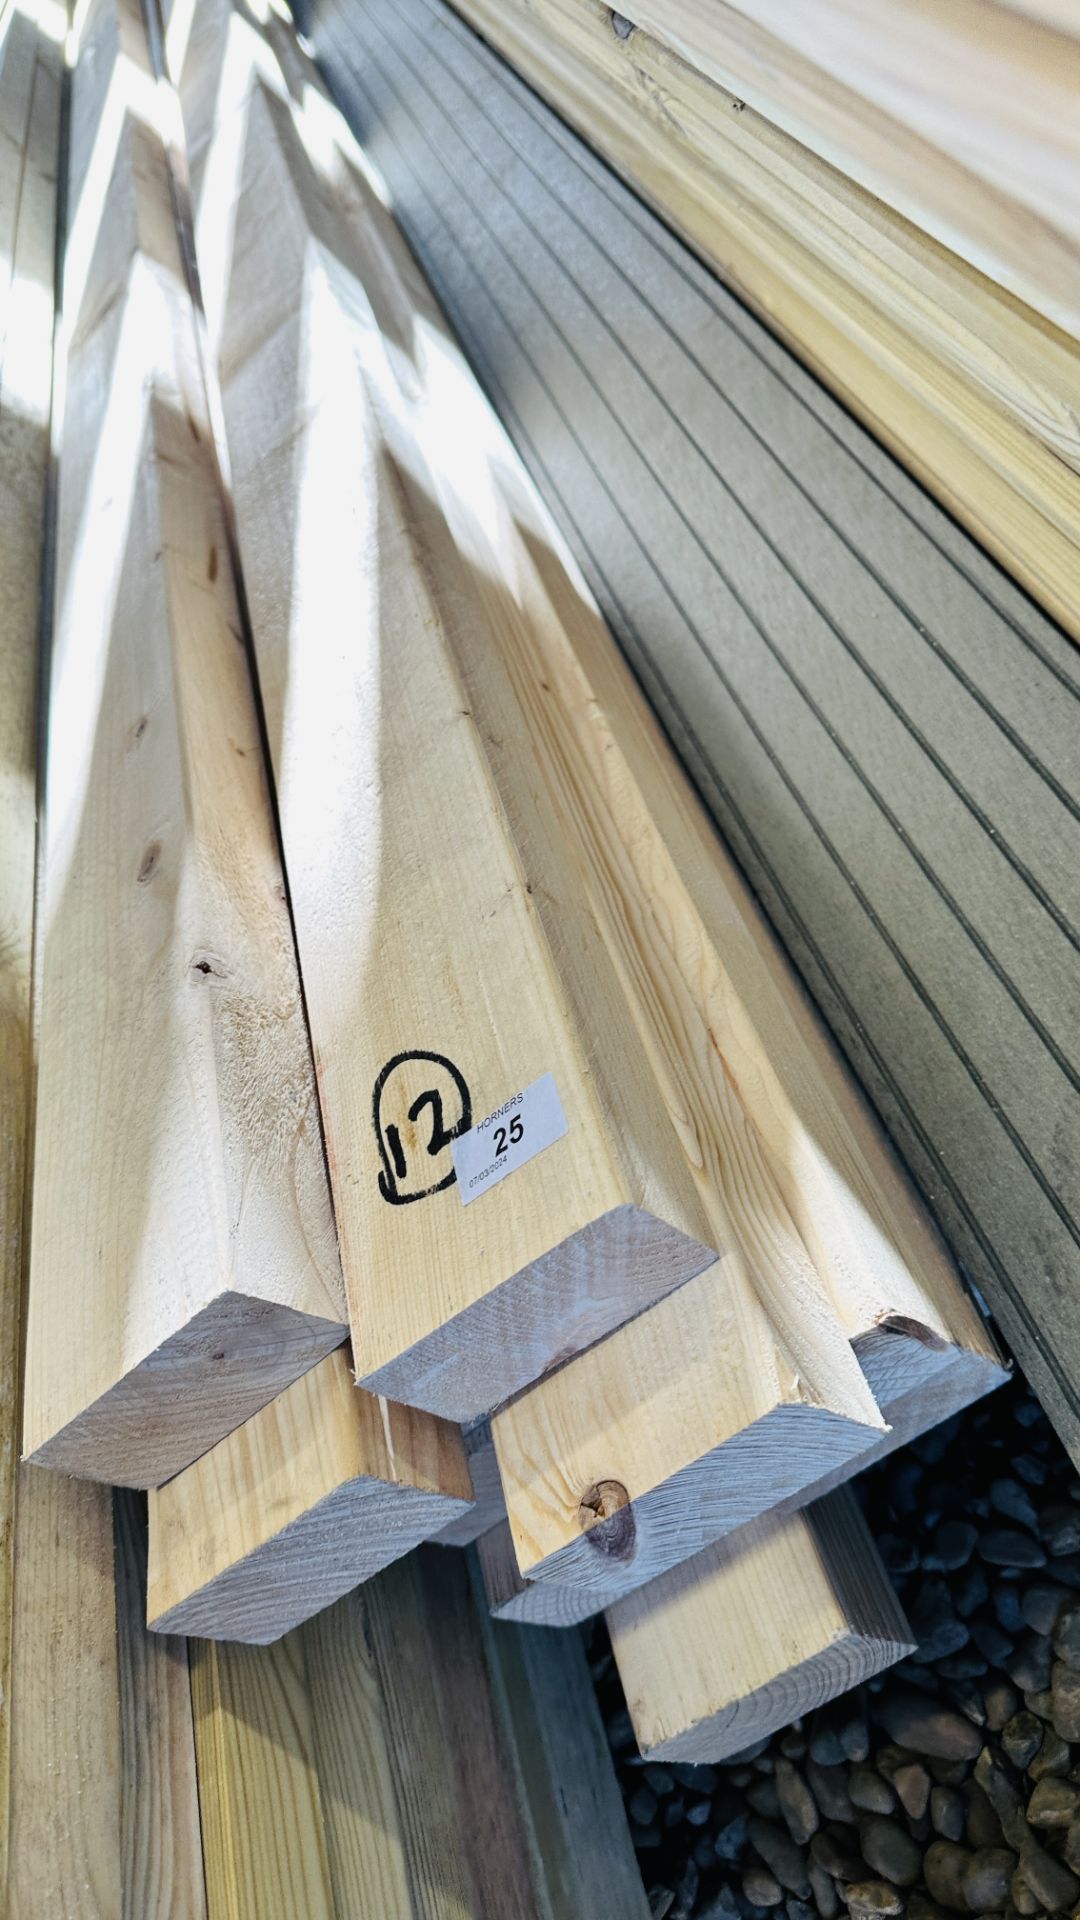 11 X 3 METRE LENGTHS 95MM X 45MM PLANED TIMBER. THIS LOT IS SUBJECT TO VAT ON HAMMER PRICE. - Image 4 of 4